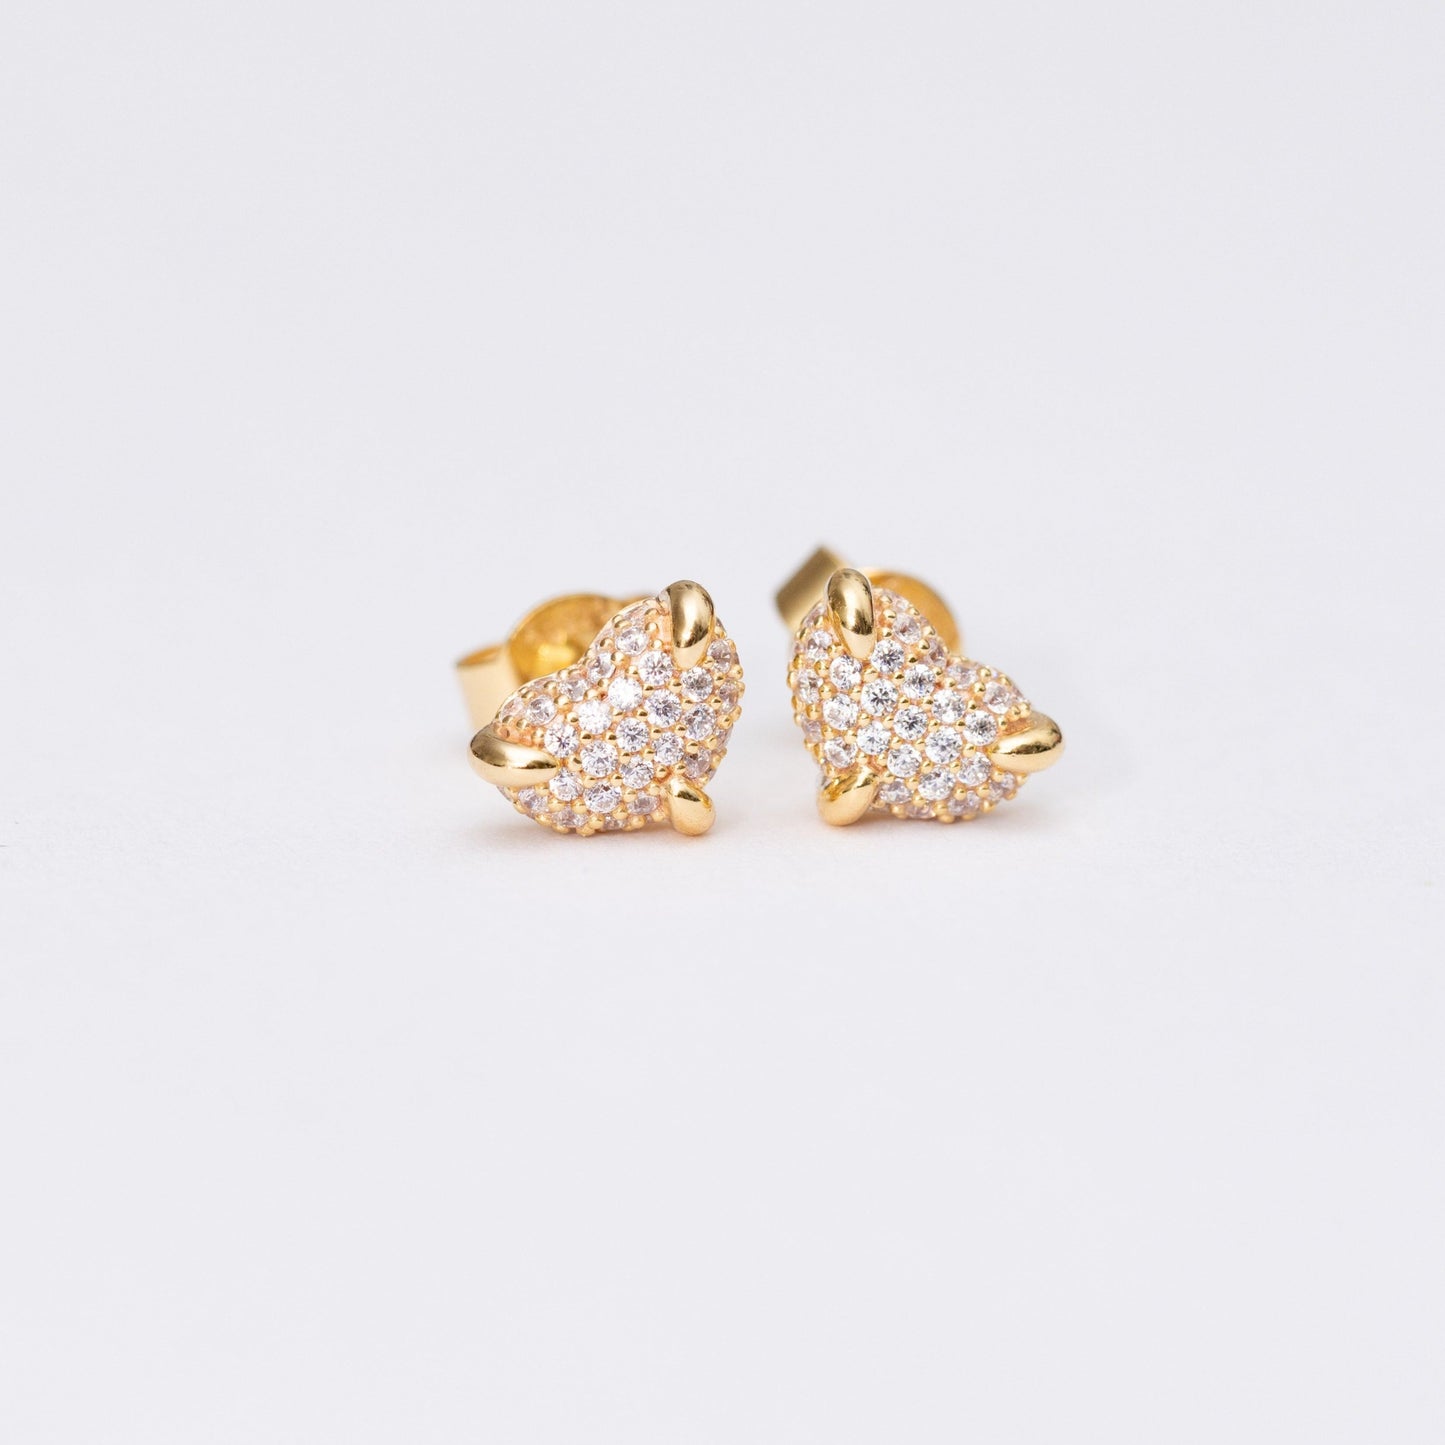 The Love earrings - gold plated